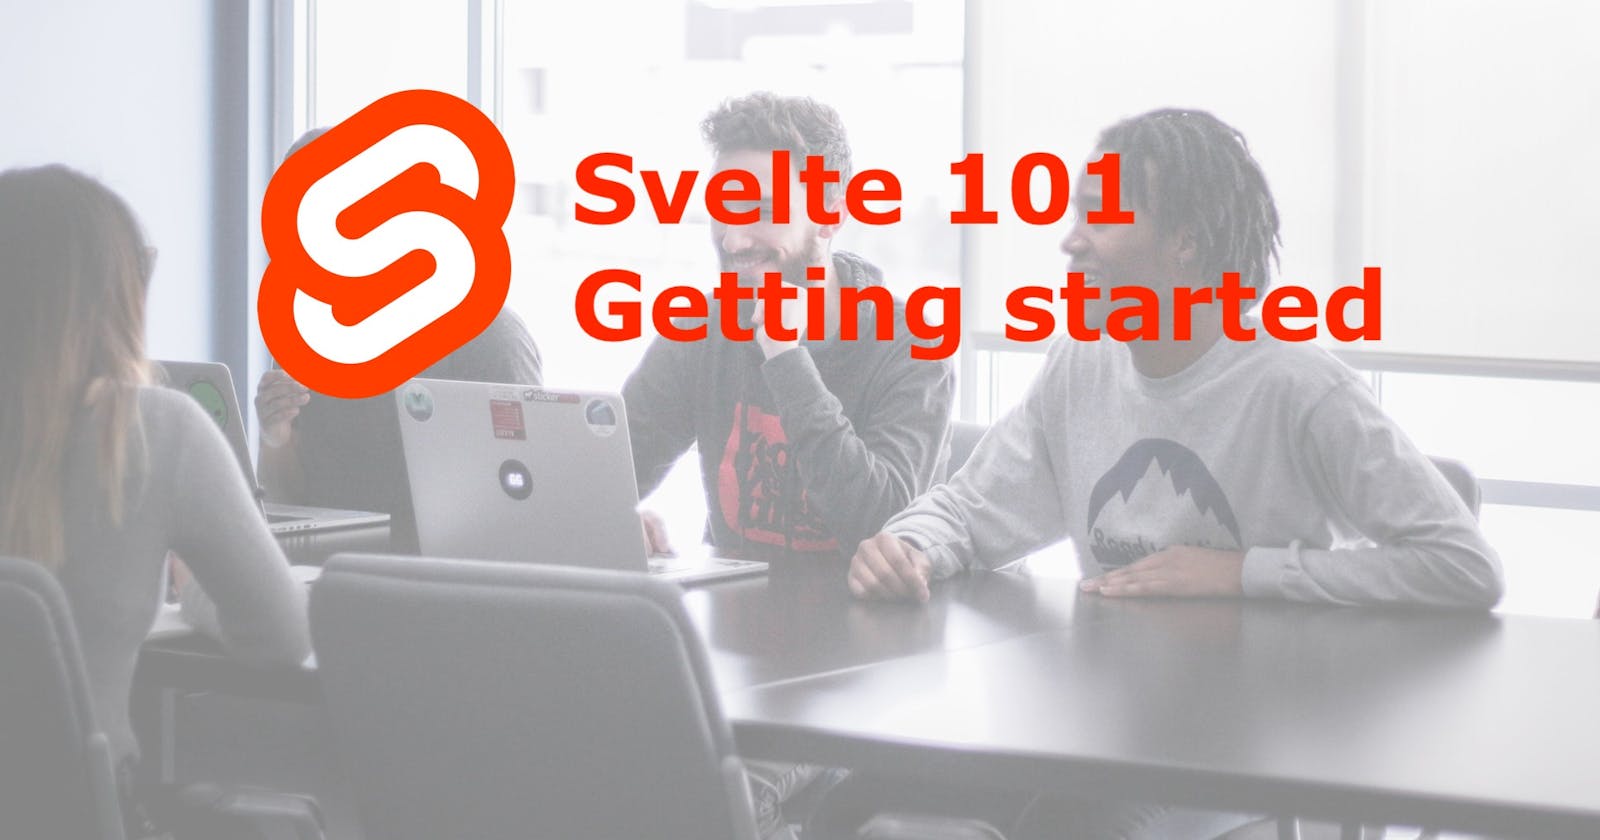 Building with Svelte - all you need to know before you start